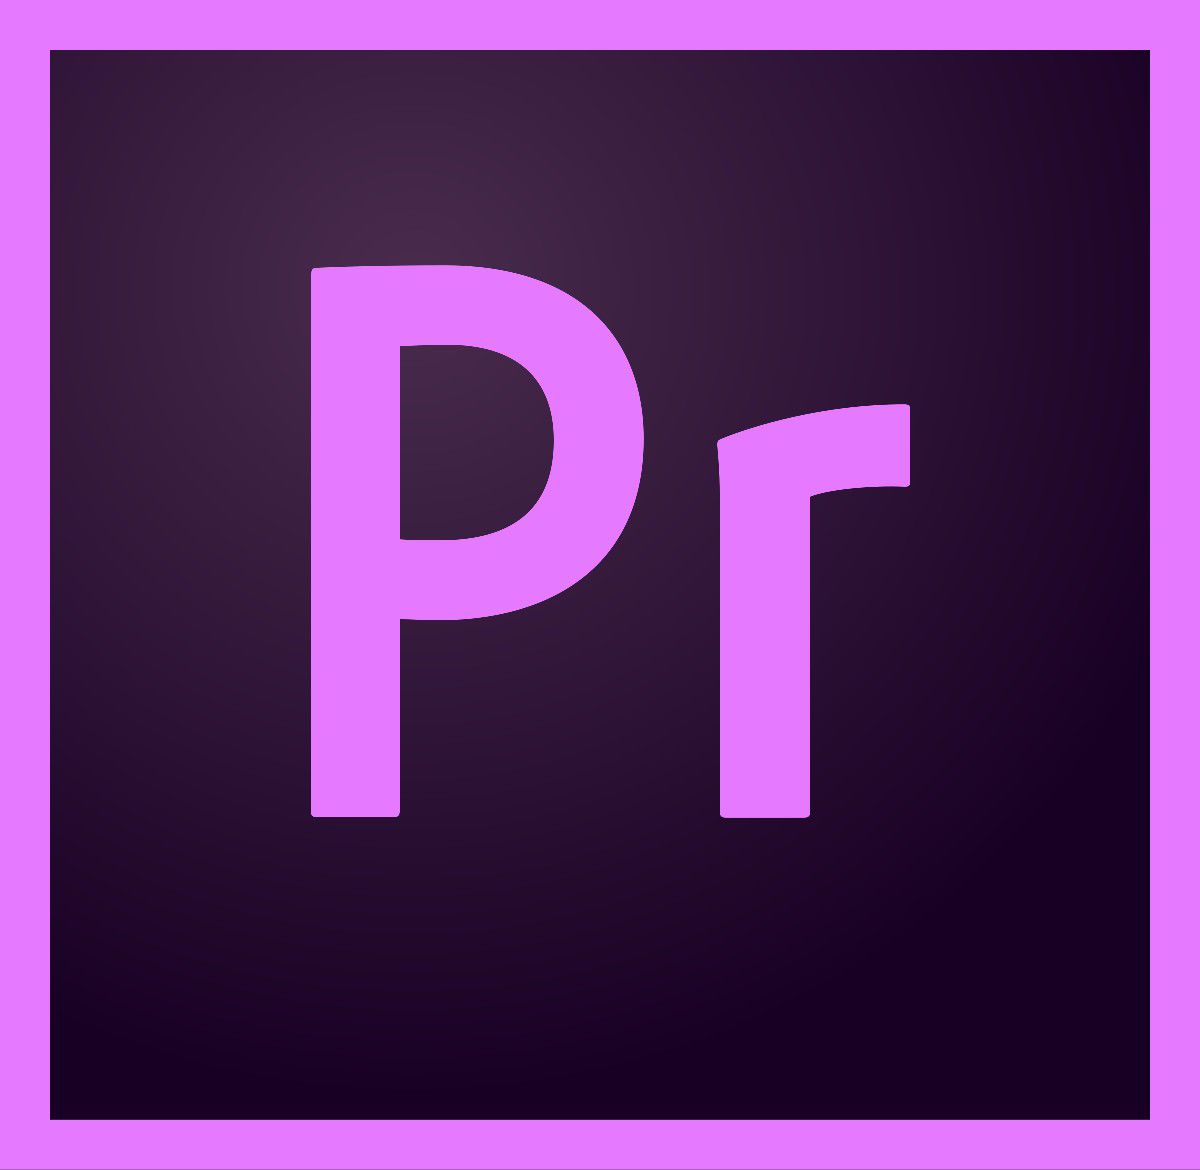 Adobe Premiere Pro (2019) (Permanent License) No More Subsription Fees.(Tangible Item)